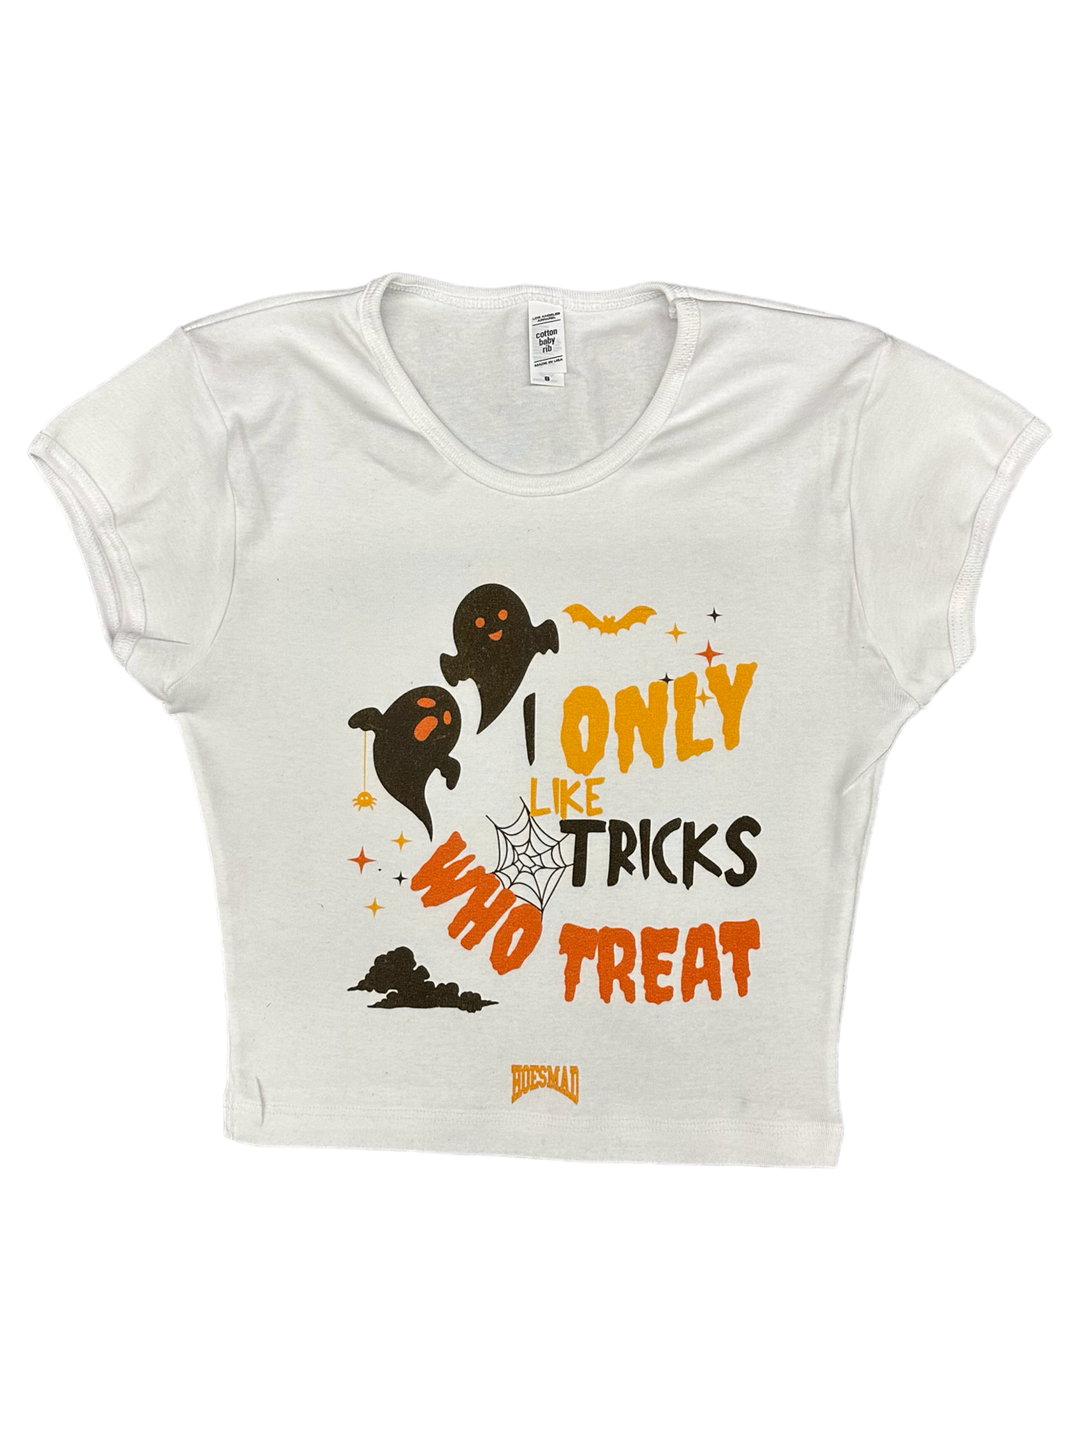 I ONLY LIKE TRICKS WHO TREAT BABY TEE - white